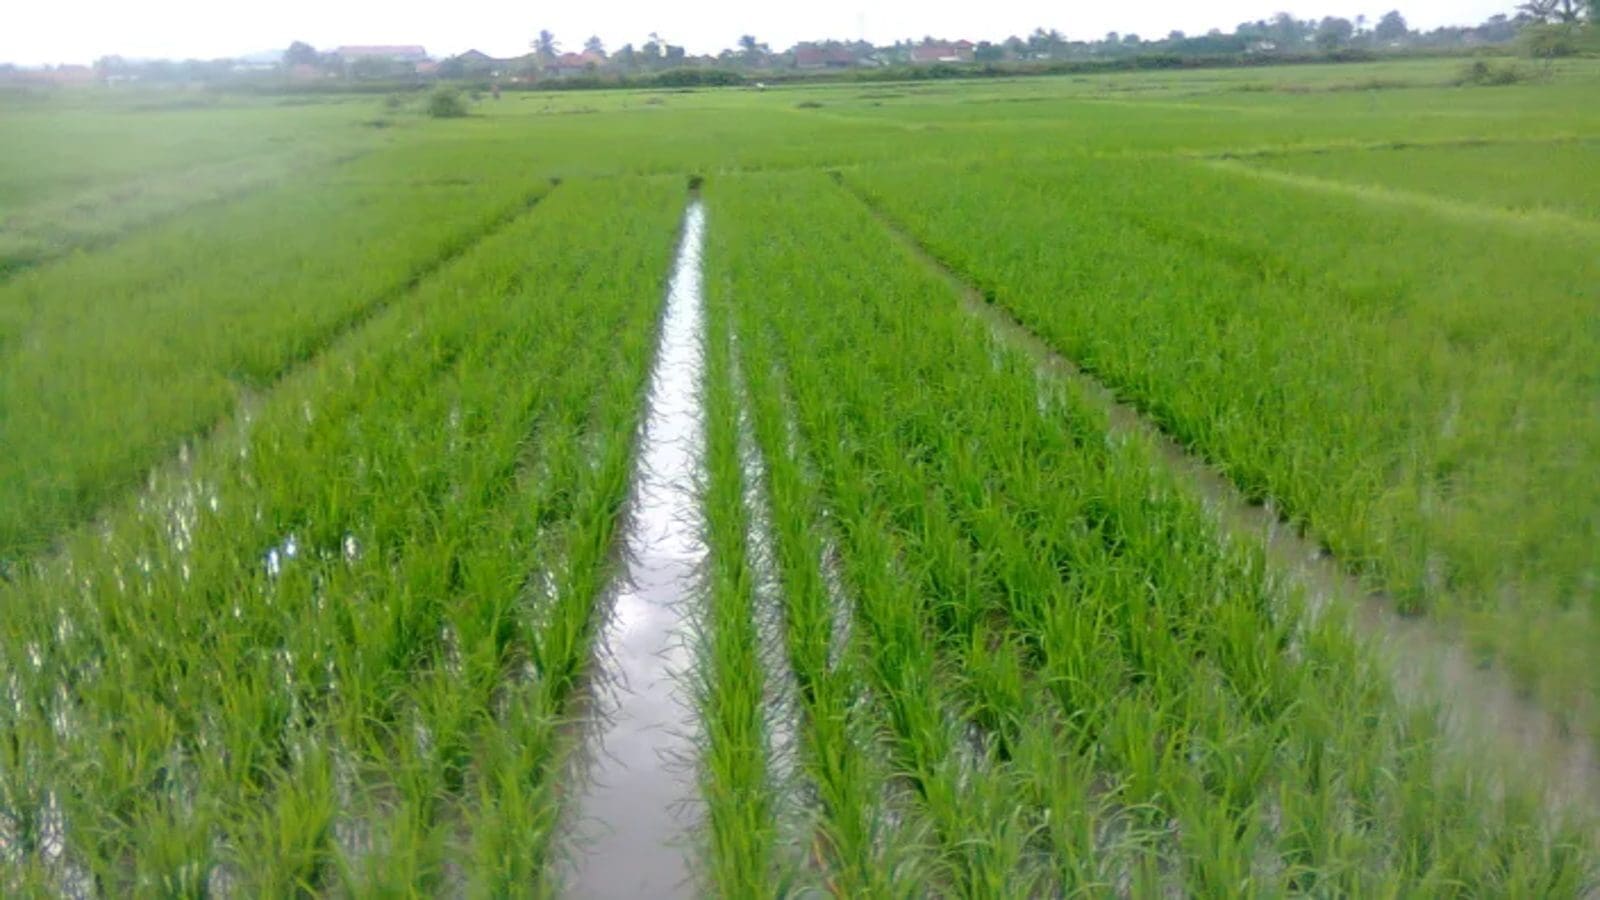 Unilever’s regenerative agriculture projects show promise in rice sustainability